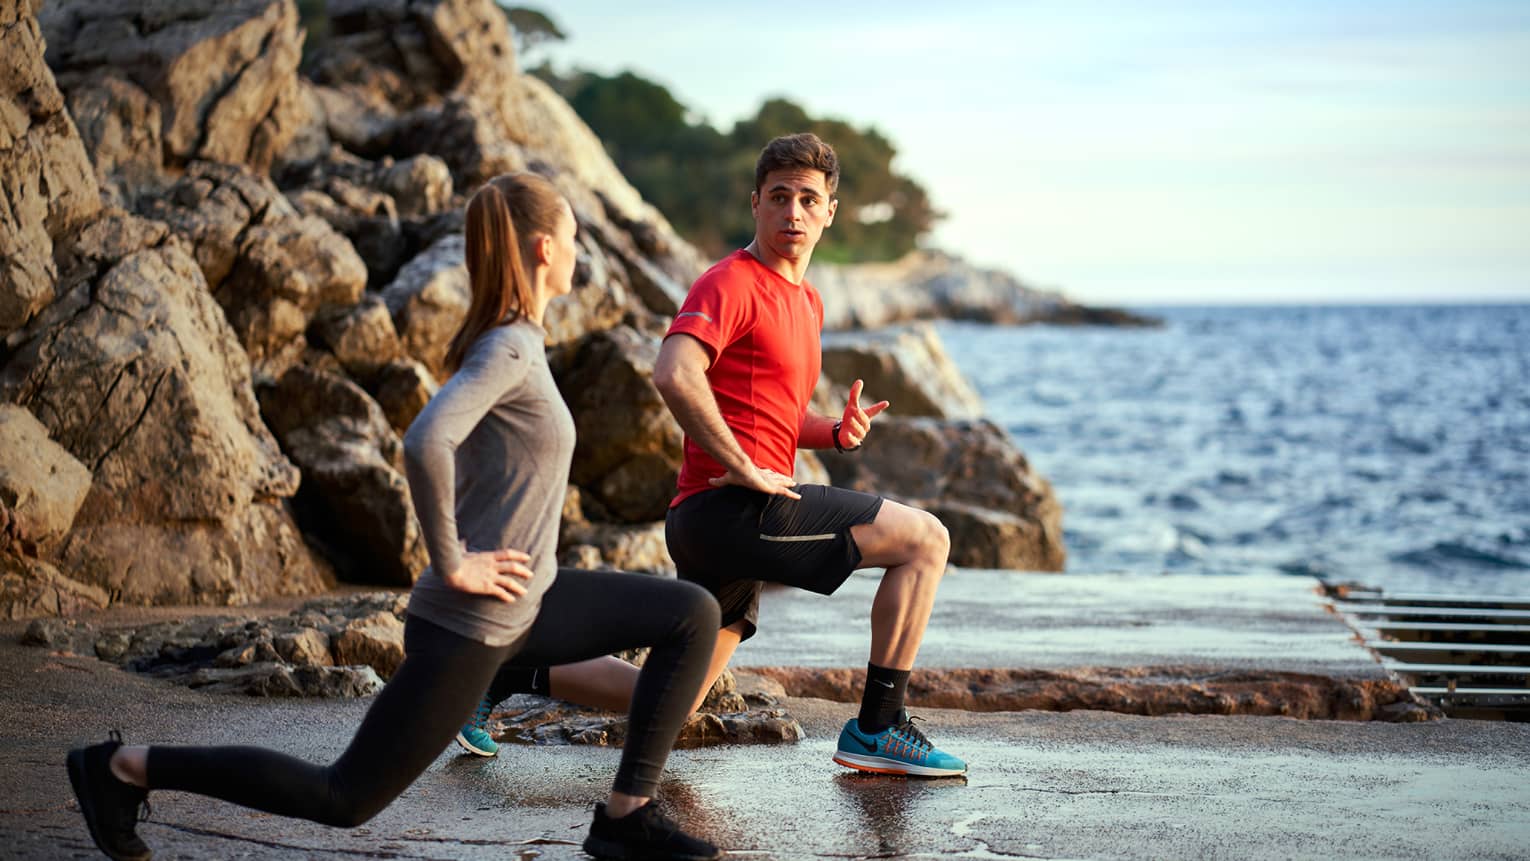 A man trains a woman while doing lunges outside next to the sea and rocks